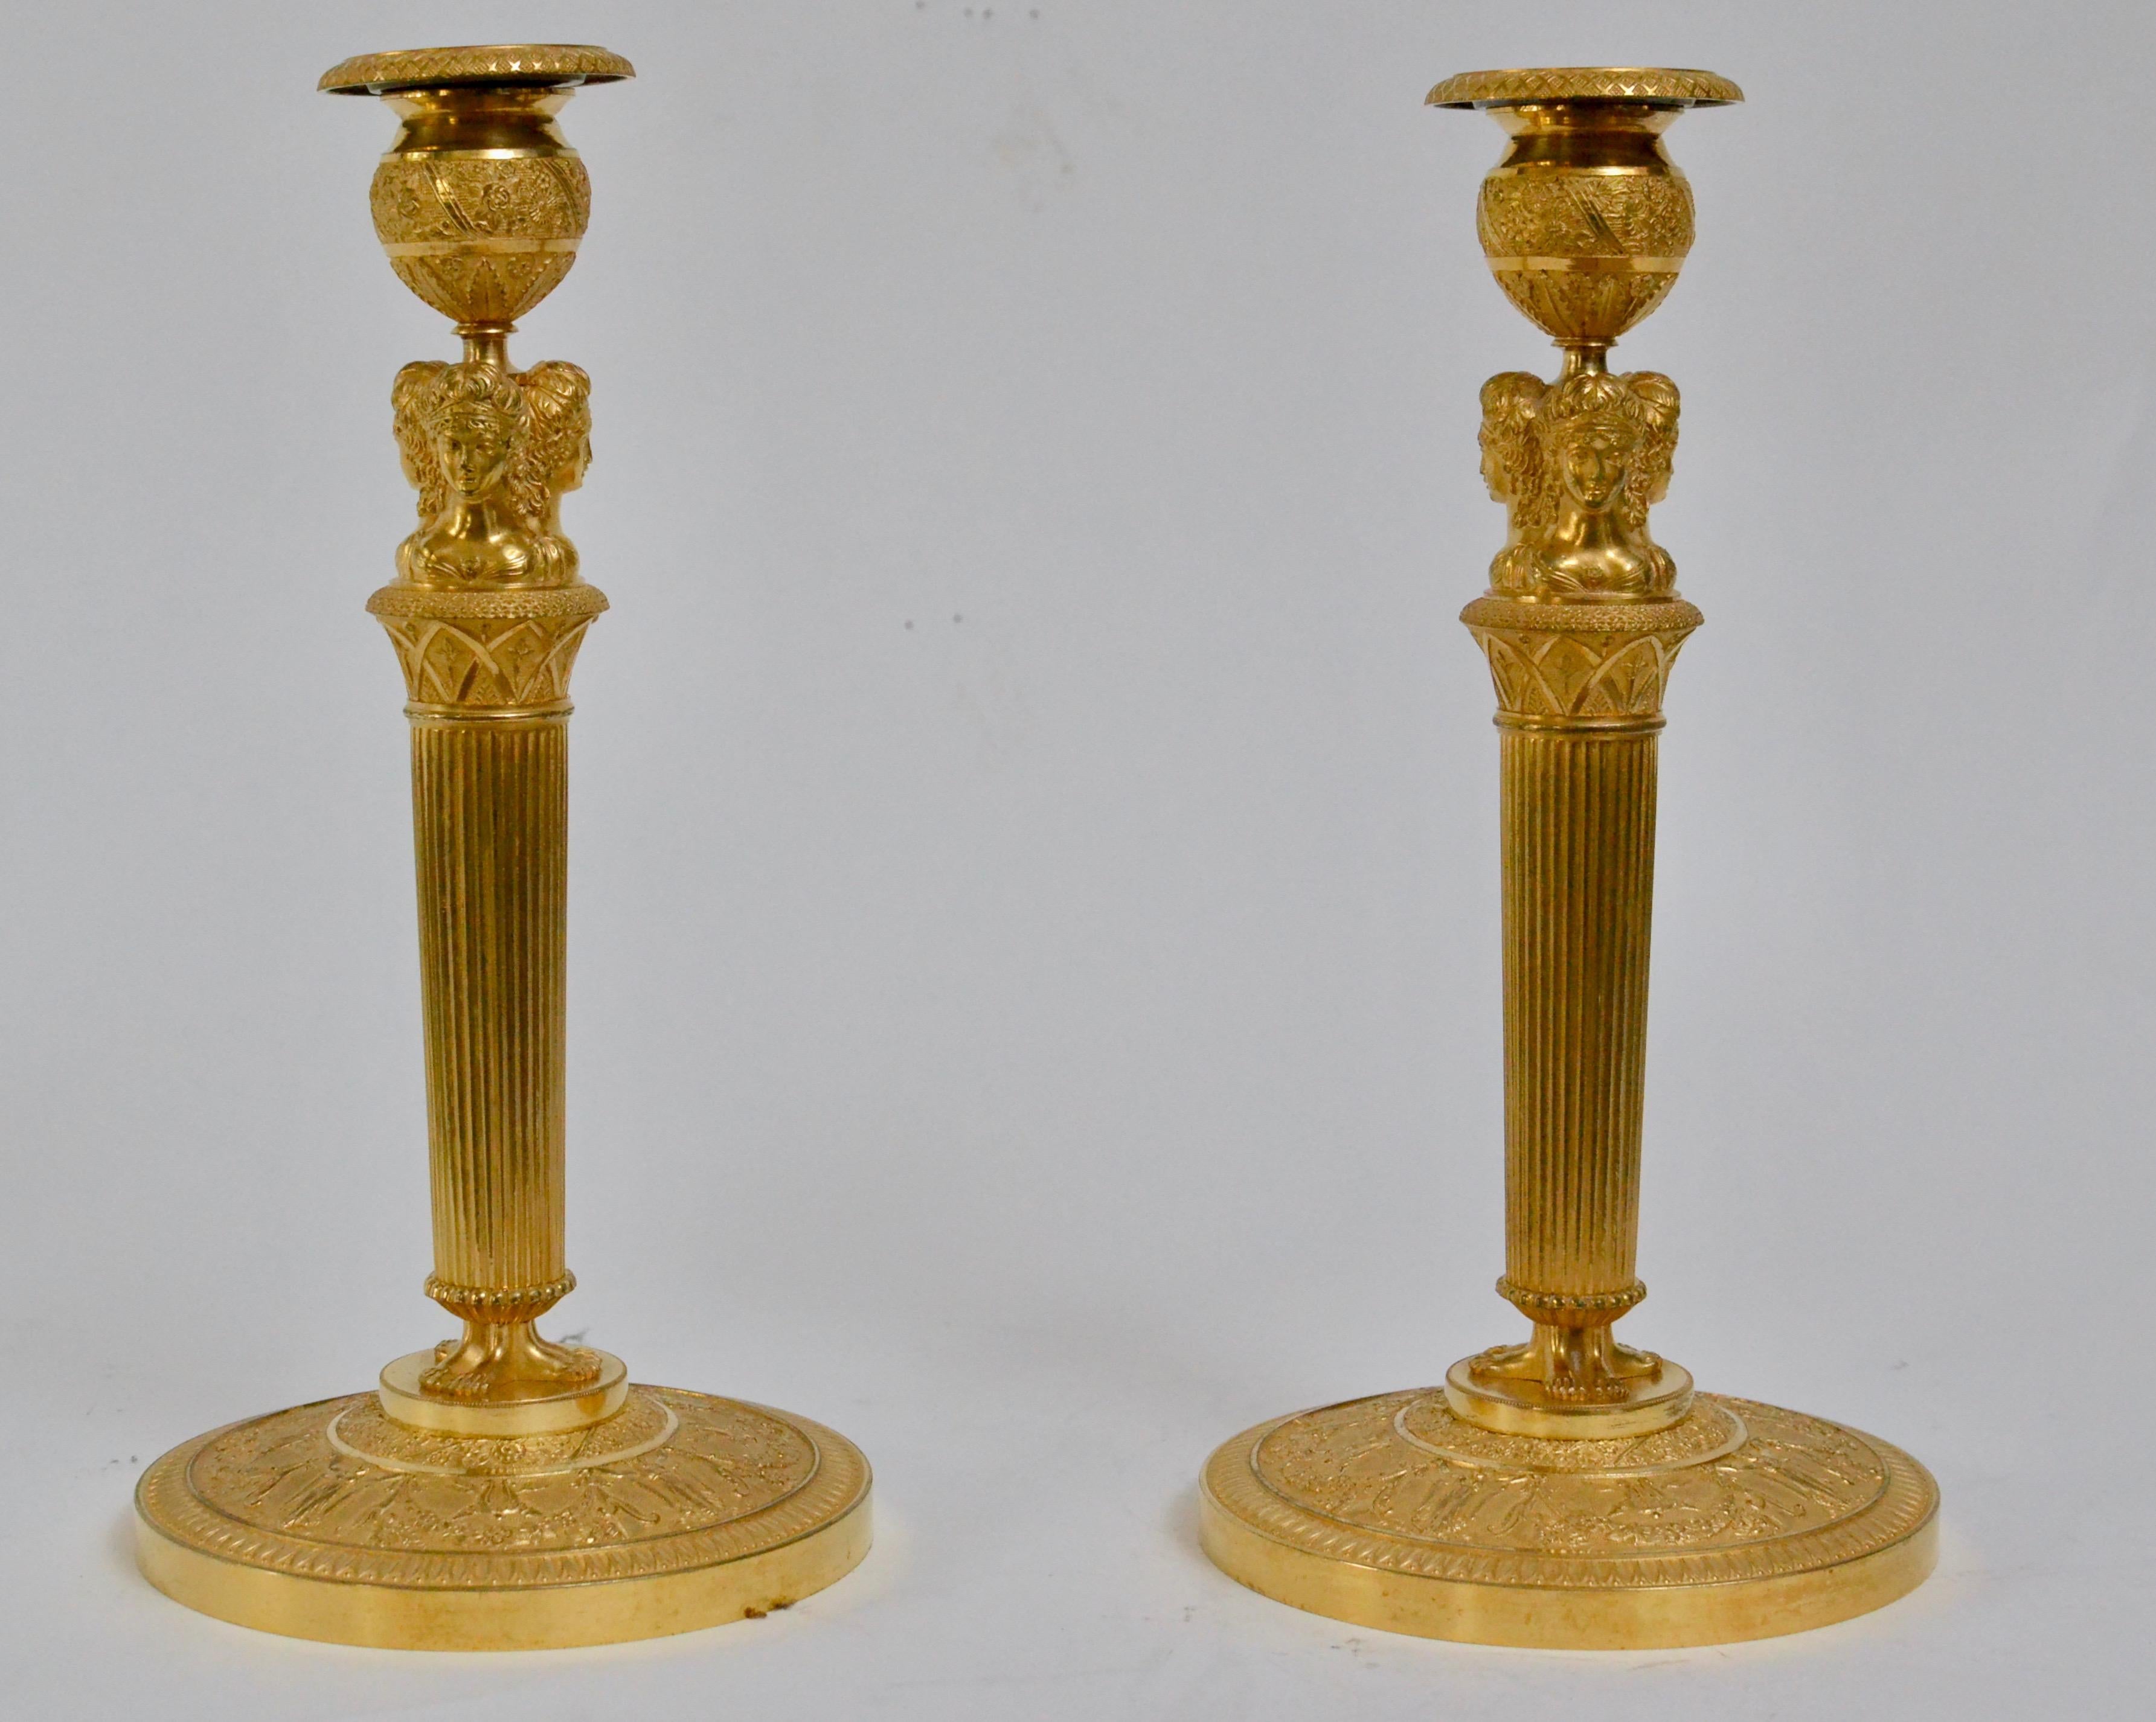 A fine pair of early French Empire gilt bronze candlesticks, circa 1810.